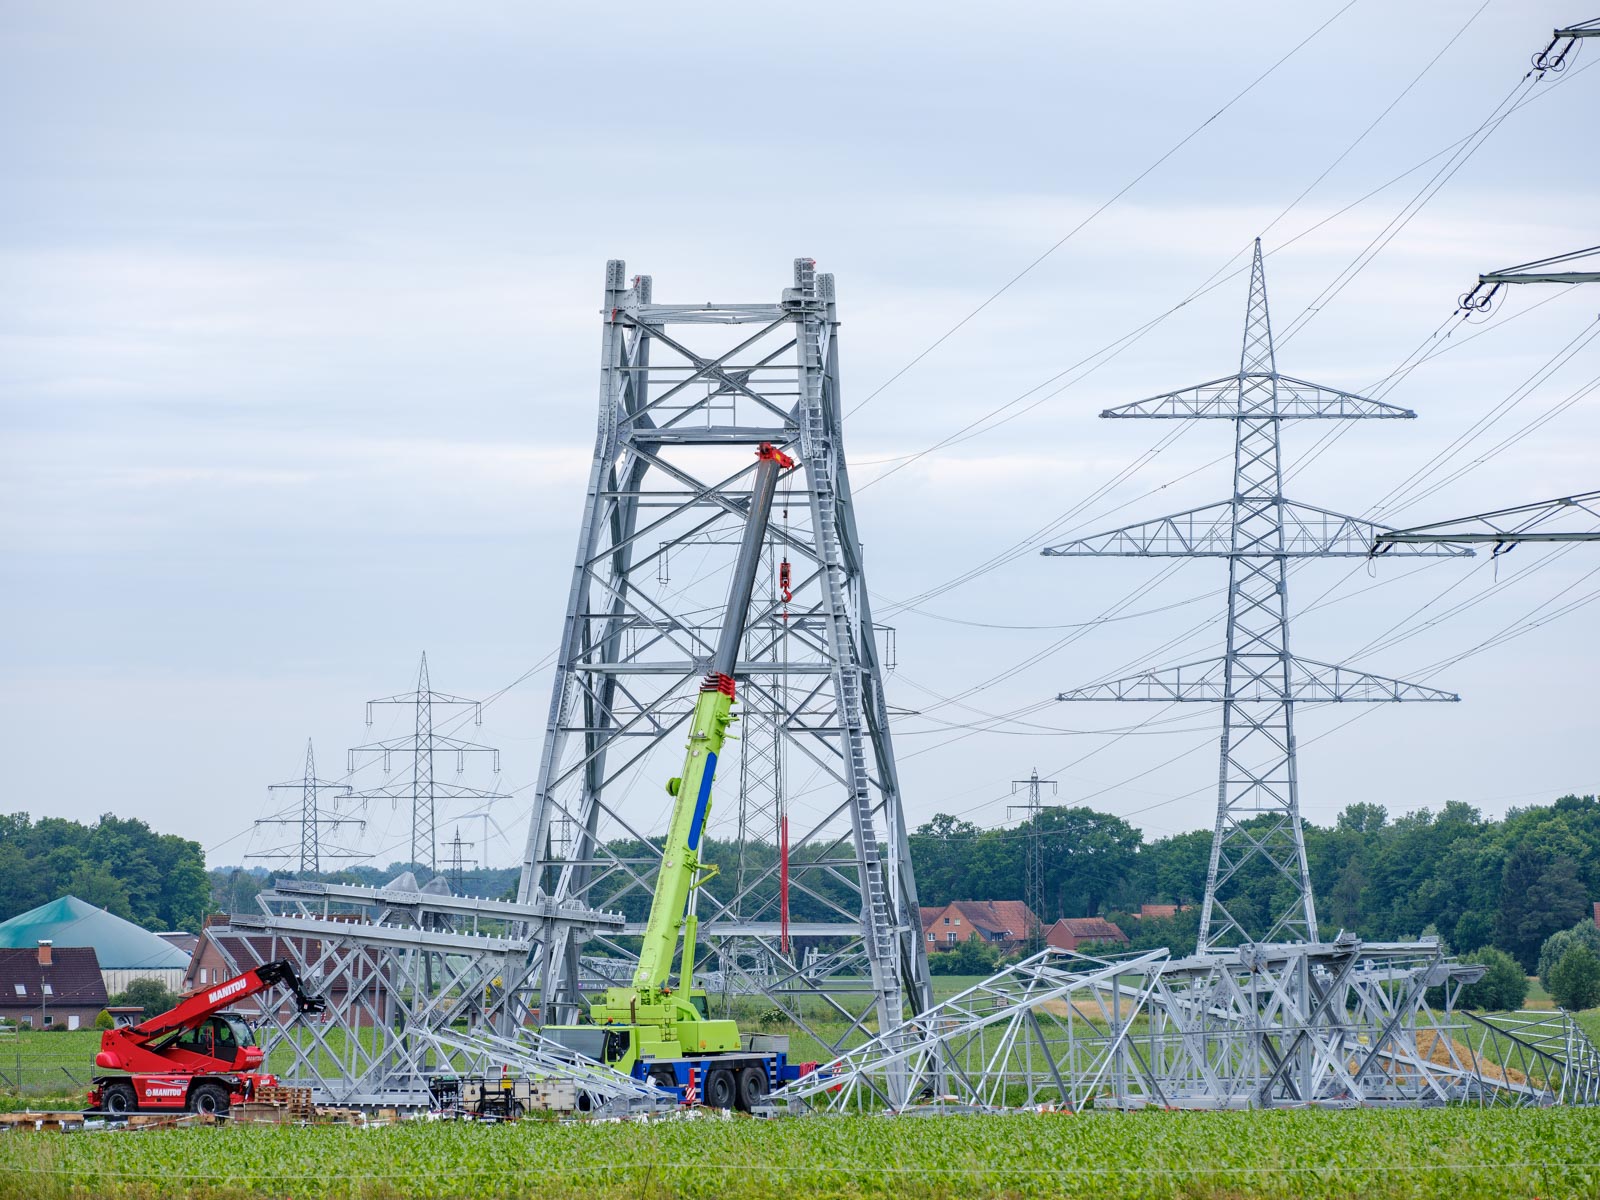 High-voltage lines under construction on a field (Halle in Westphalia, Germany).